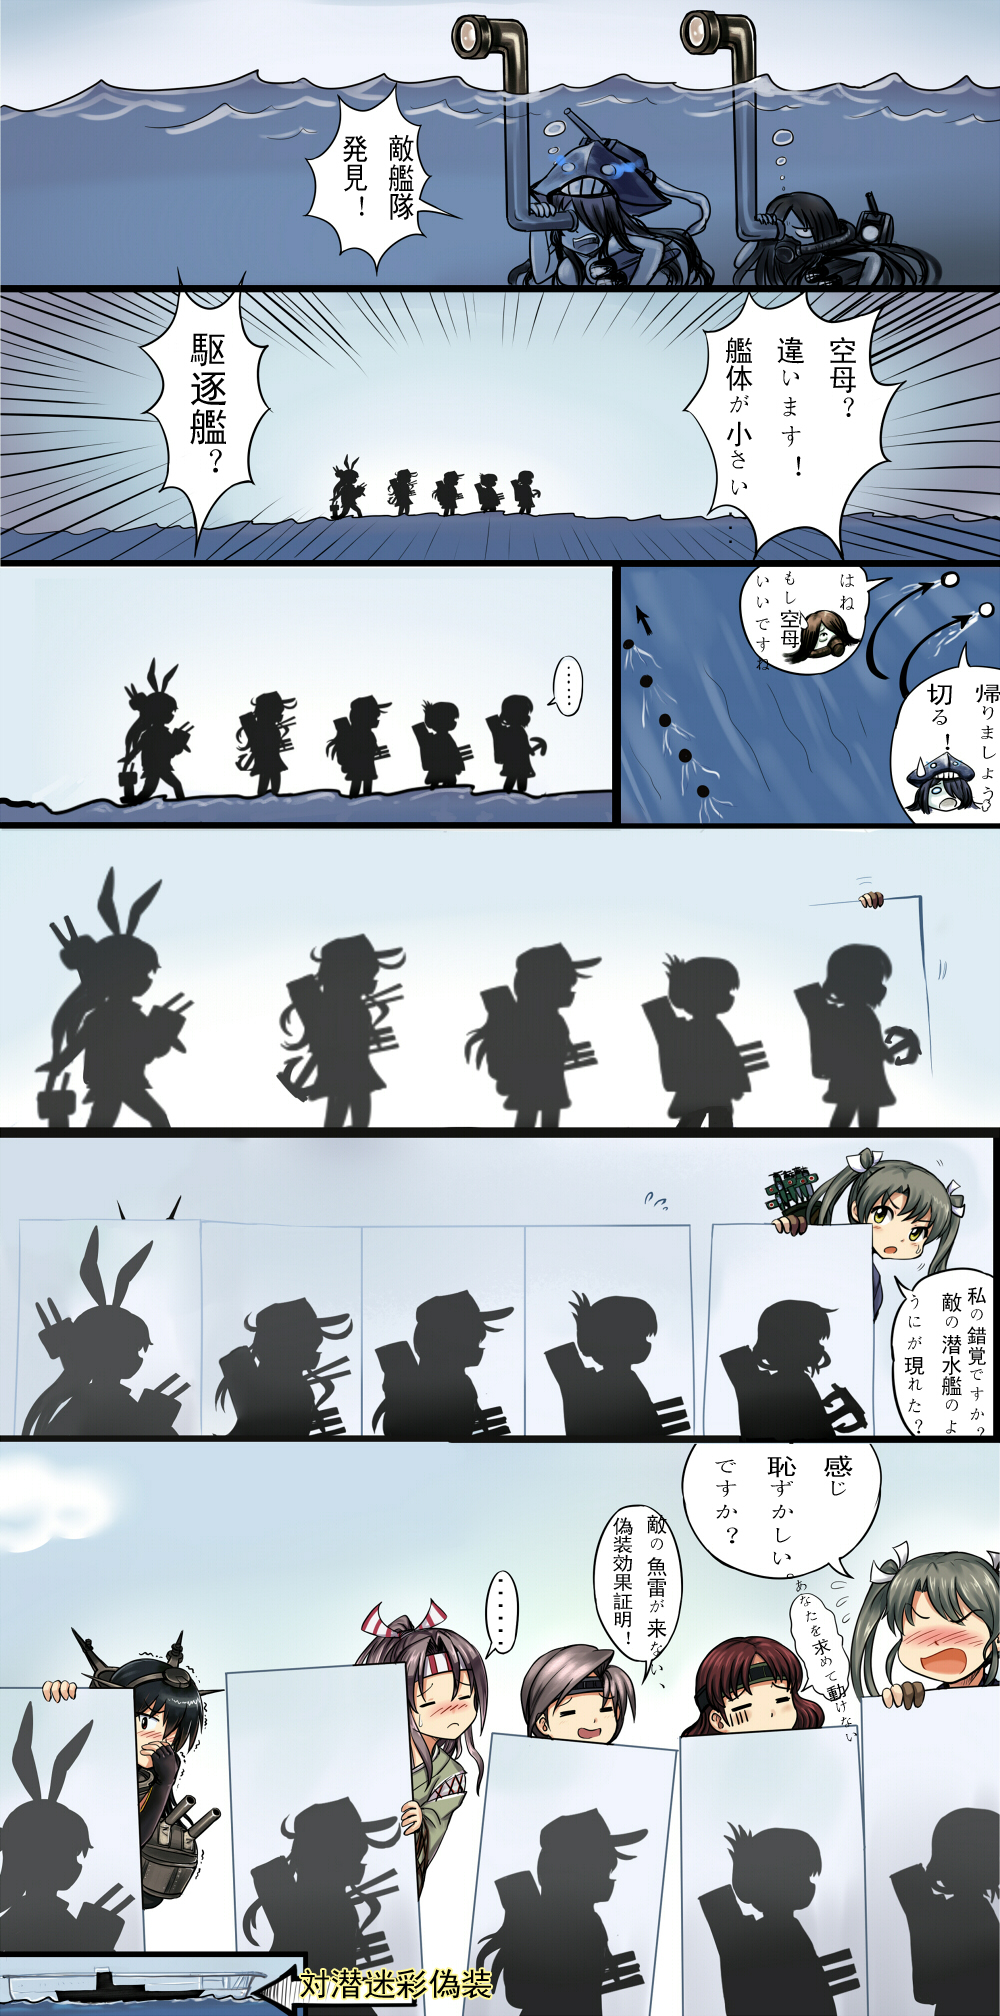 6+girls =_= akatsuki_(kantai_collection) black_hair brown_hair bubble carrying_under_arm chitose_(kantai_collection) chiyoda_(kantai_collection) comic covering_mouth diagram directional_arrow embarrassed gloom_(expression) glowing glowing_eyes grey_hair hachimaki hair_ribbon hairband hat headband hibiki_(kantai_collection) hiding highres ikazuchi_(kantai_collection) inazuma_(kantai_collection) ka-class_submarine kantai_collection long_hair multiple_girls nagato_(kantai_collection) open_mouth pale_skin periscope ponytail rensouhou-chan ribbon shimakaze_(kantai_collection) shinkaisei-kan short_hair silhouette smile so-class_submarine spoken_ellipsis sweatdrop teeth torpedo translated trembling twintails underwater water y.ssanoha yellow_eyes zuihou_(kantai_collection) zuikaku_(kantai_collection)